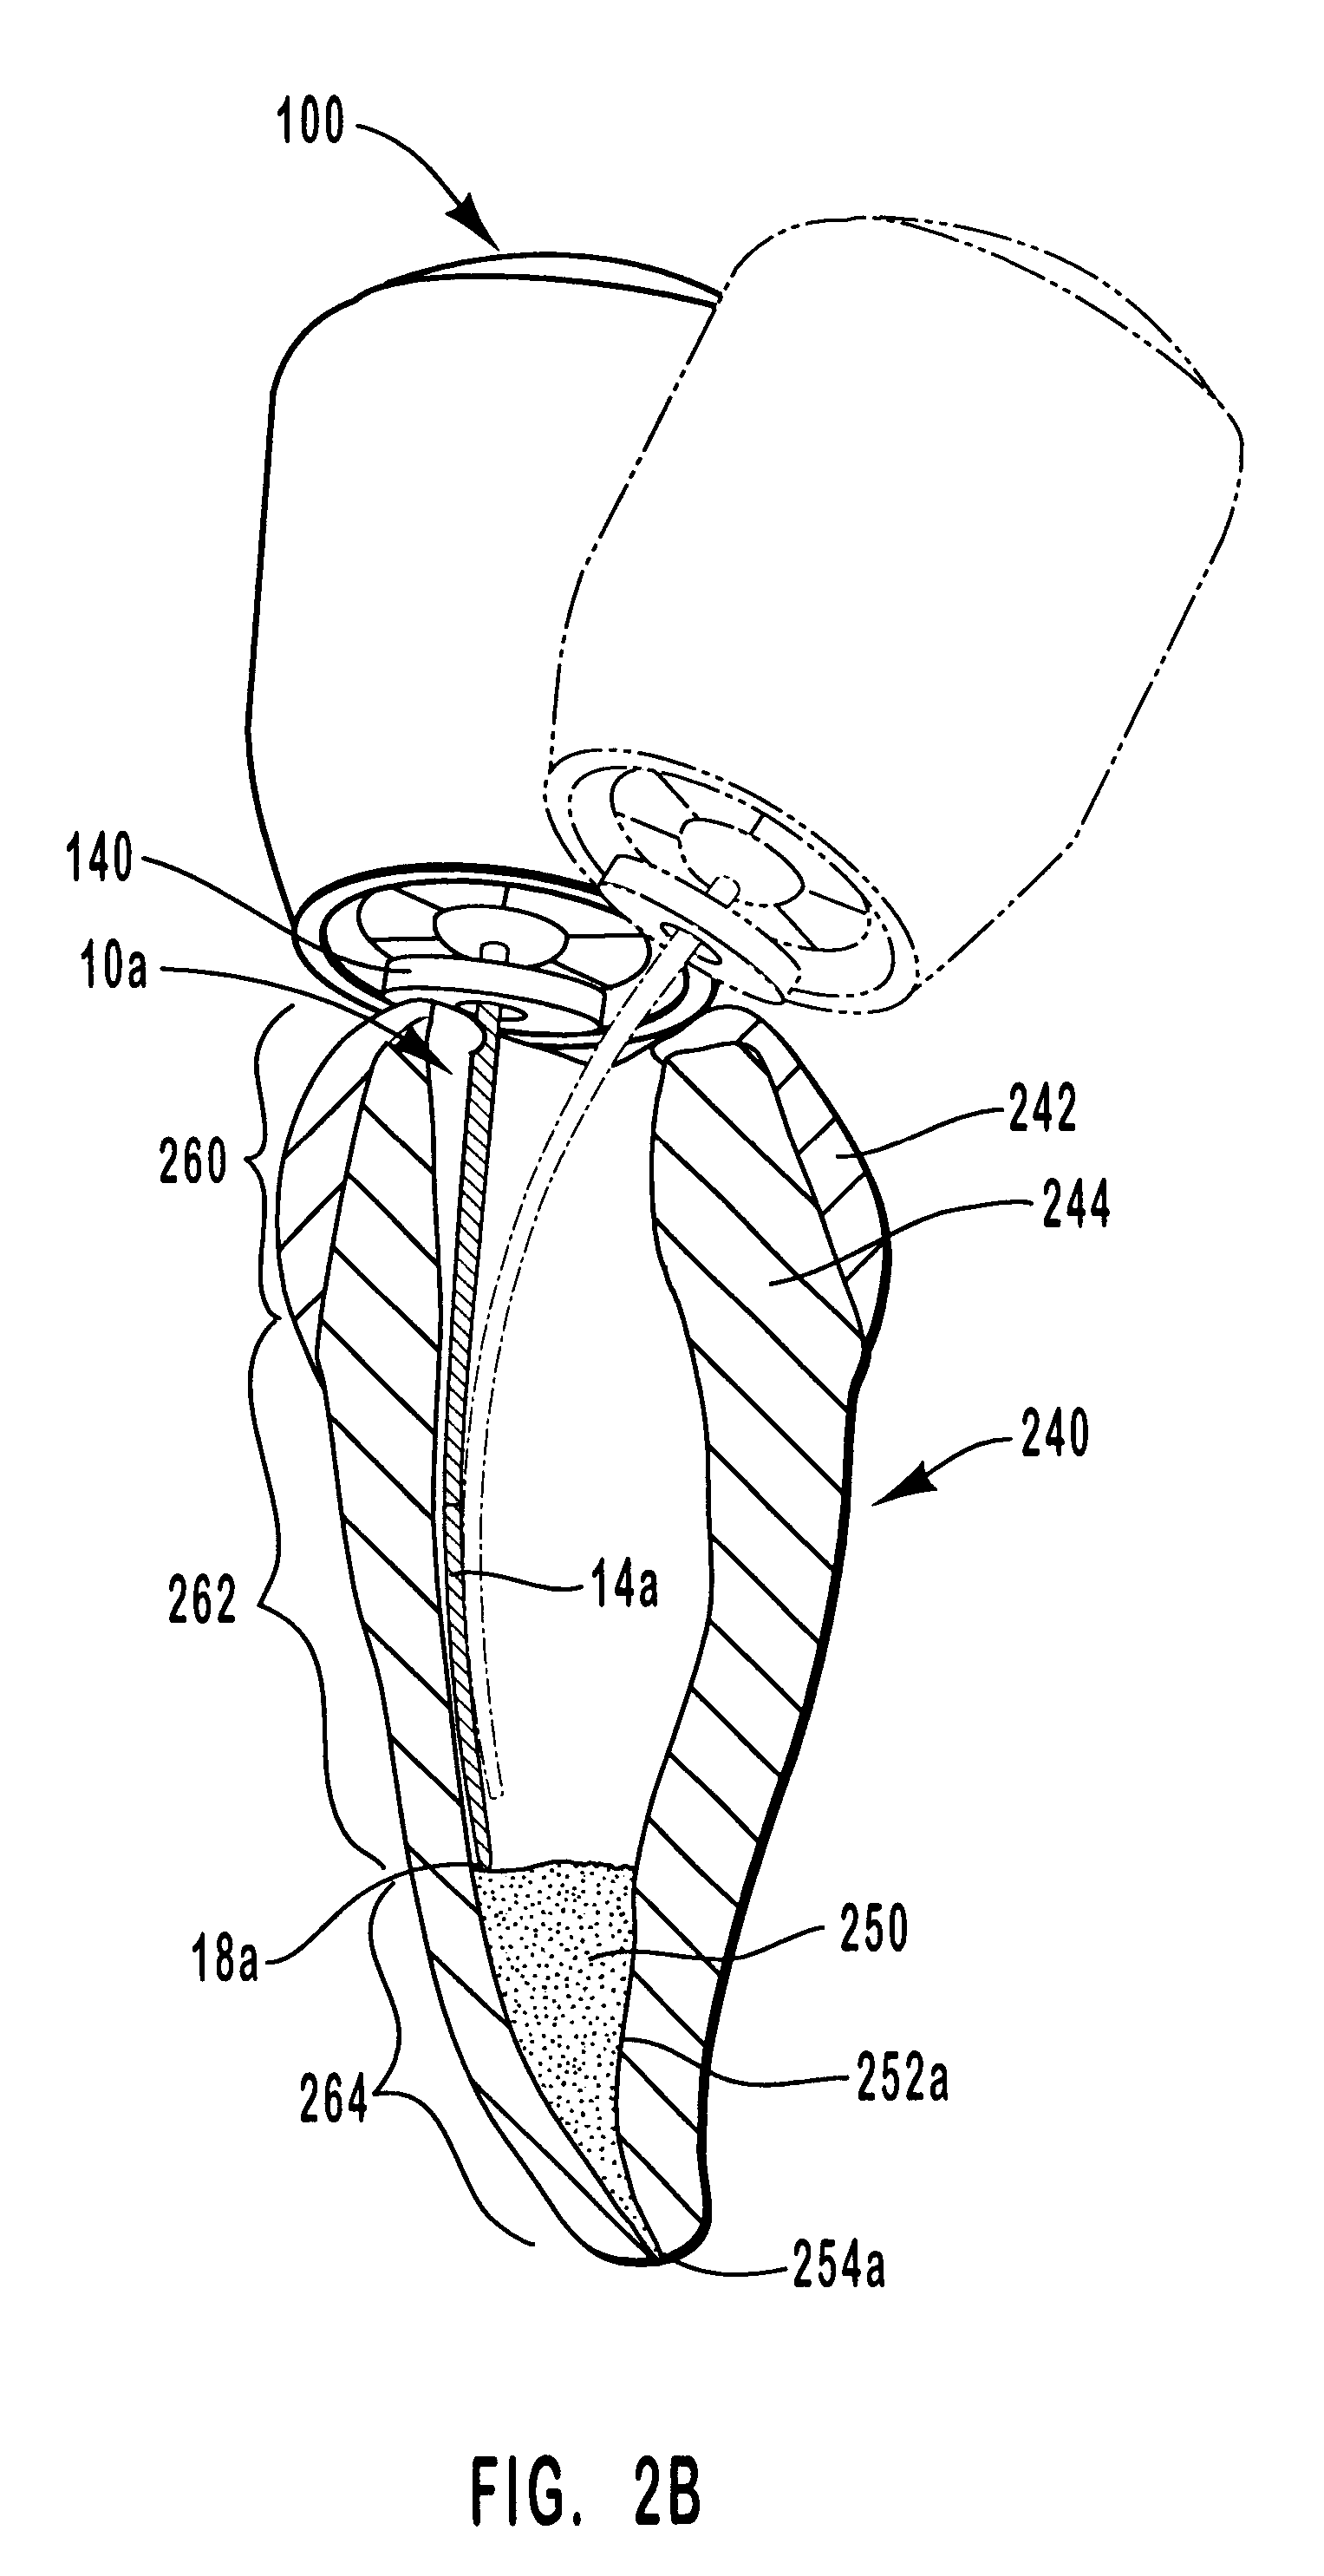 Precipitation hardenable stainless steel endodontic instruments and methods for manufacturing and using the instruments